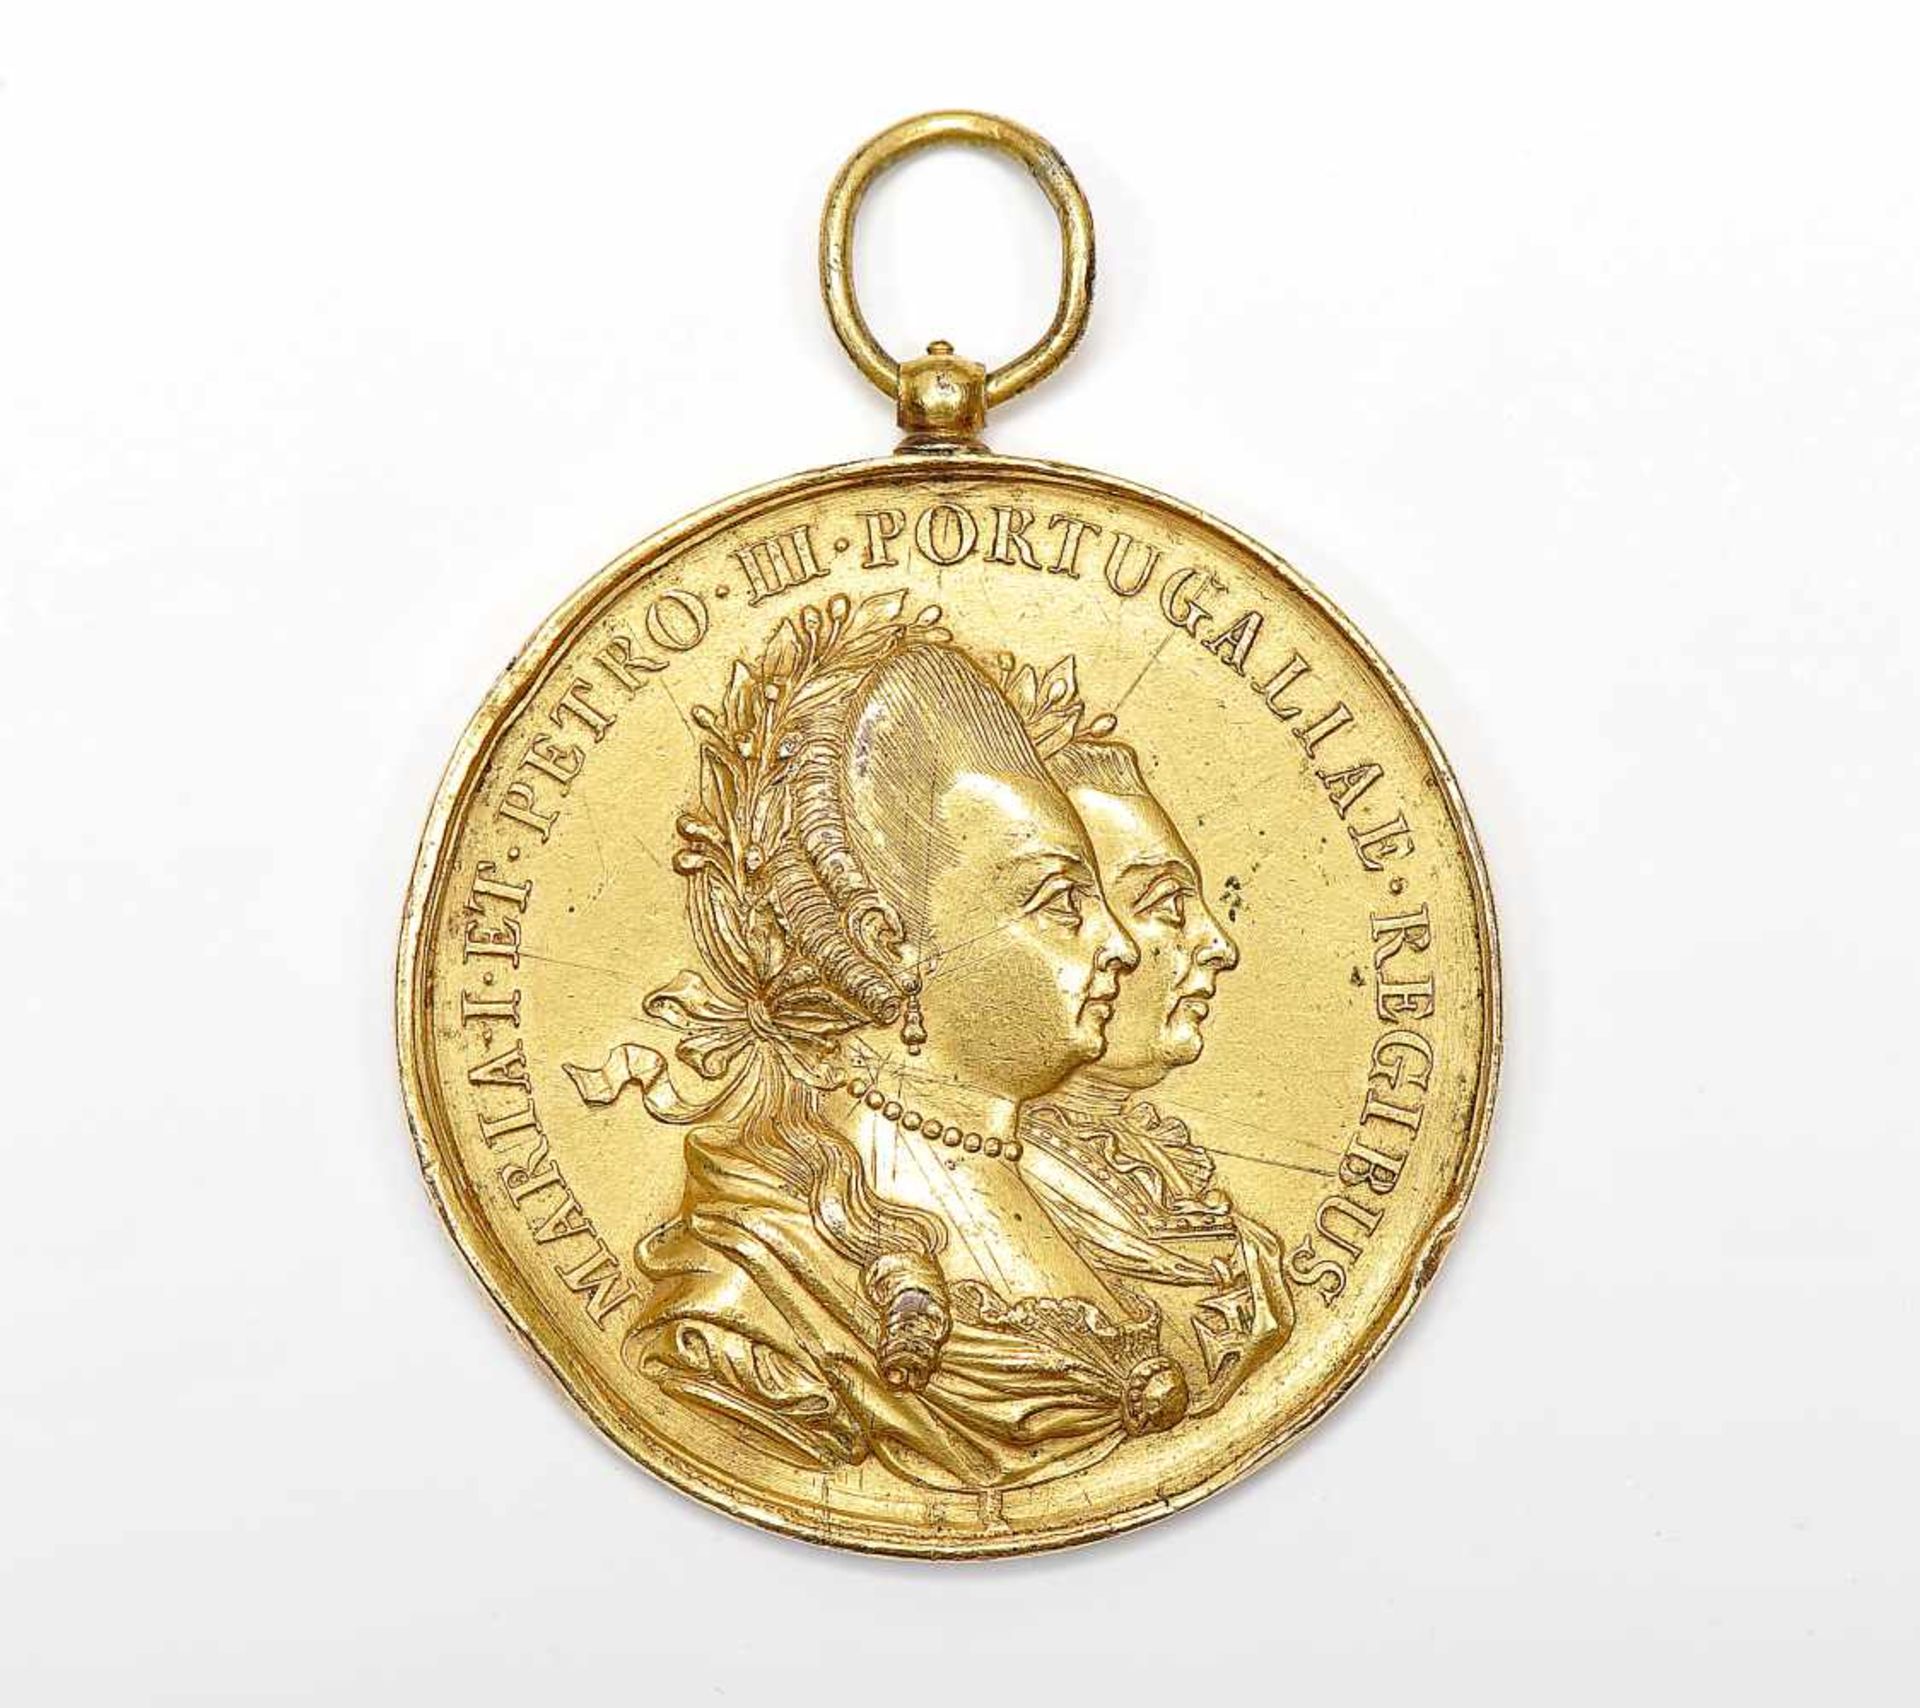 A Medal celebrating the Foundation of the Church of the Most Sacred Heart of Jesus, gilt bronze, one